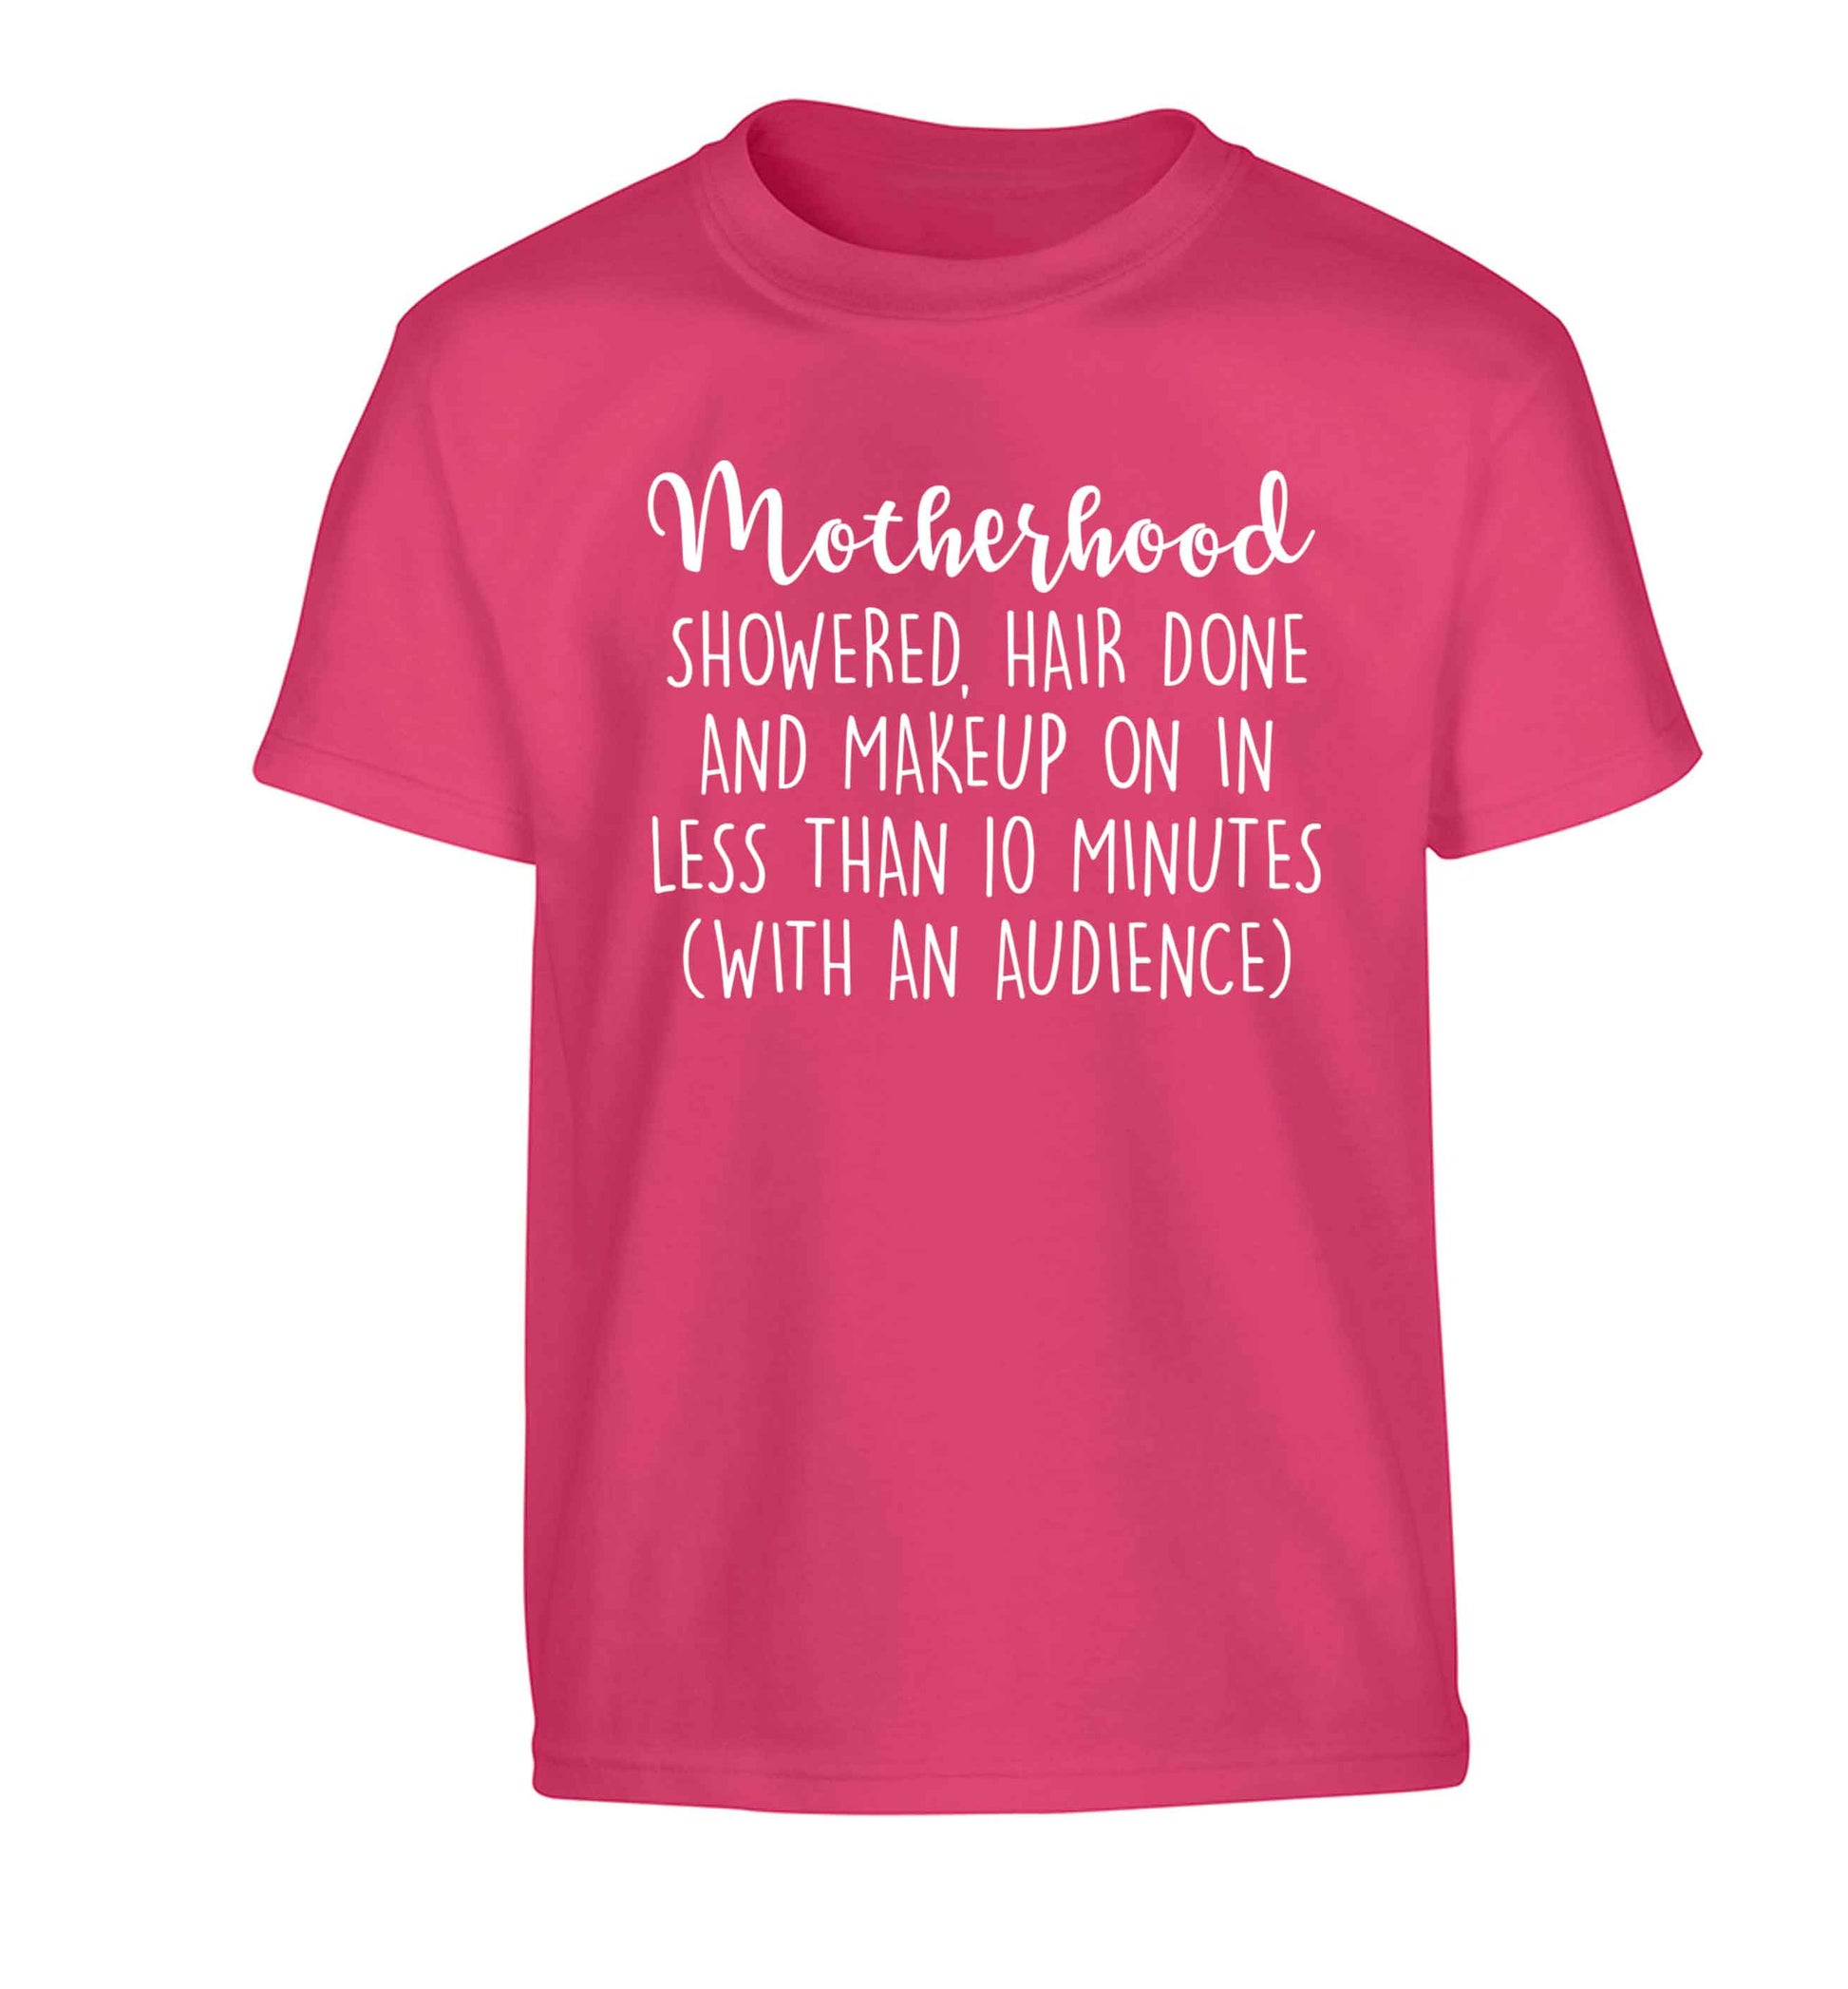 Motherhood, showered, hair done and makeup on Children's pink Tshirt 12-13 Years